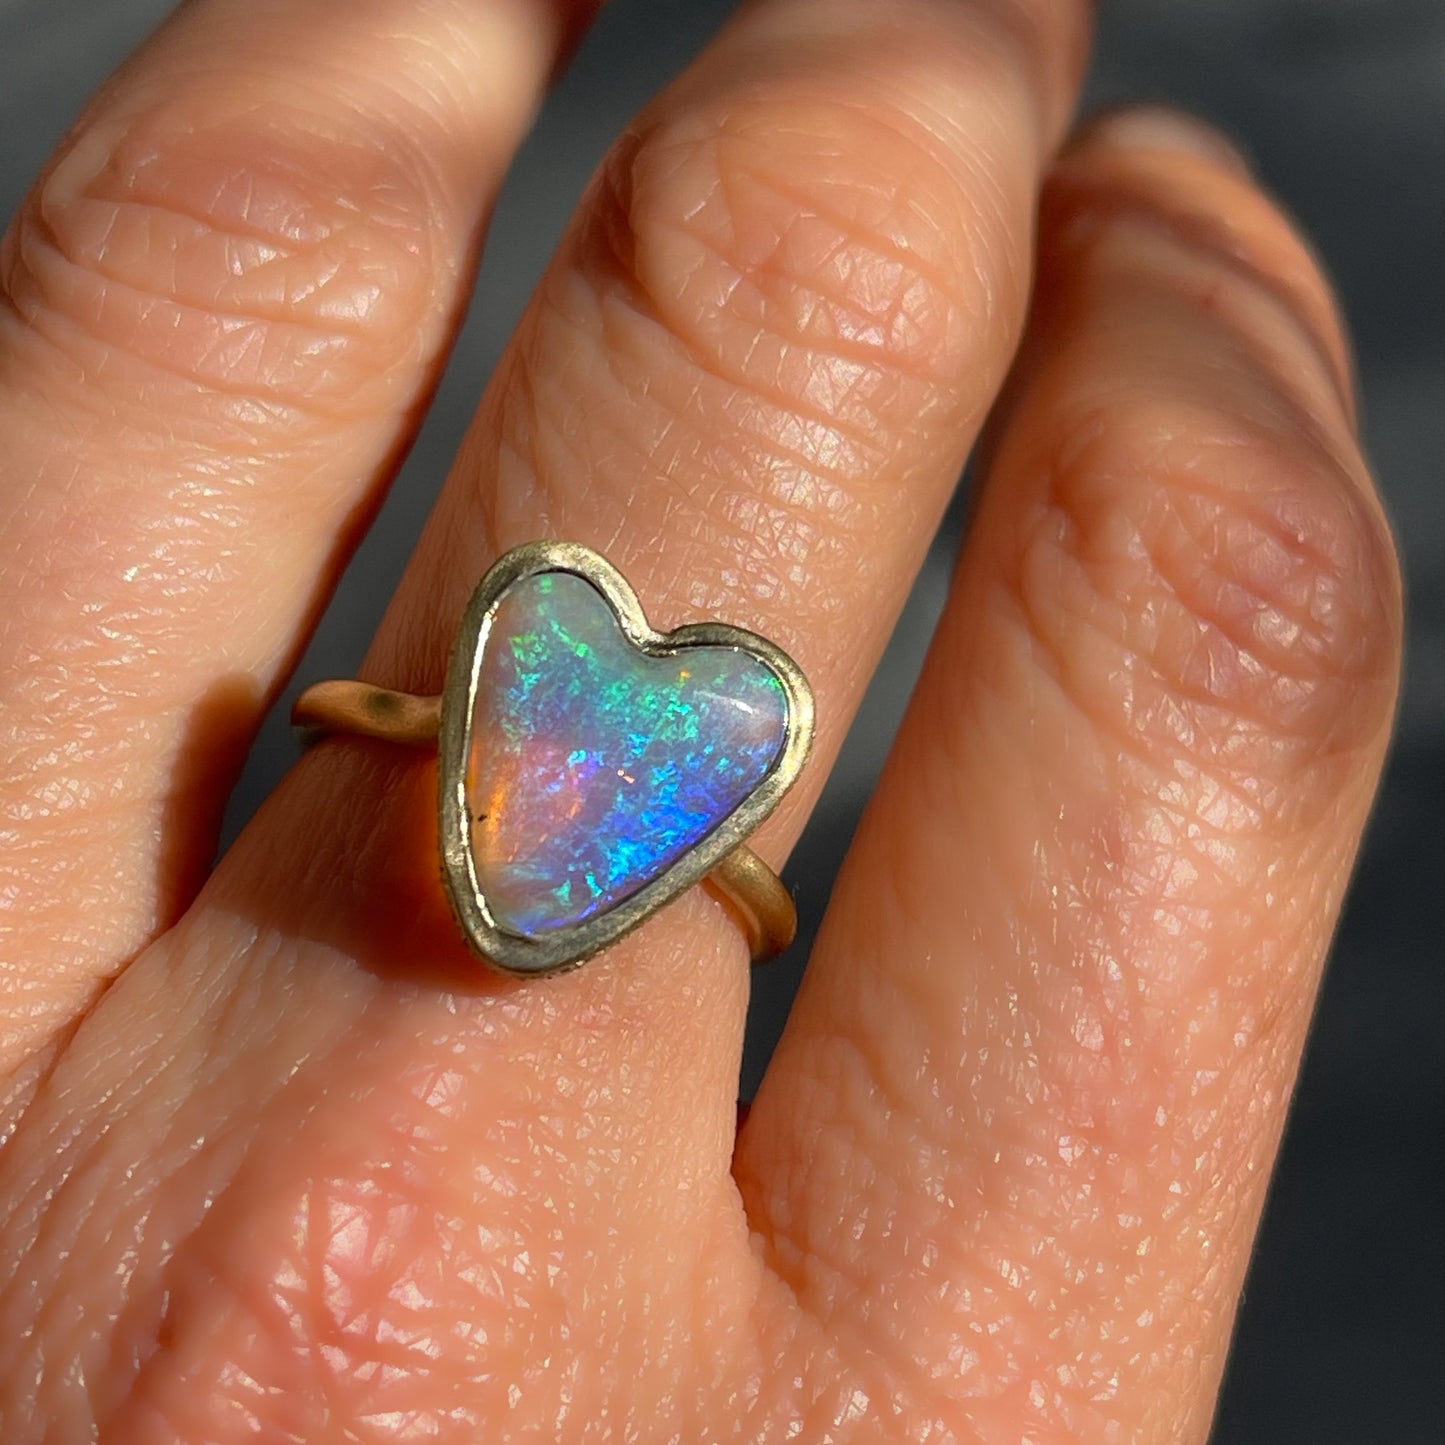 An Australian Opal Ring by NIXIN Jewelry with an opal heart and diamond halo set in 14k gold.